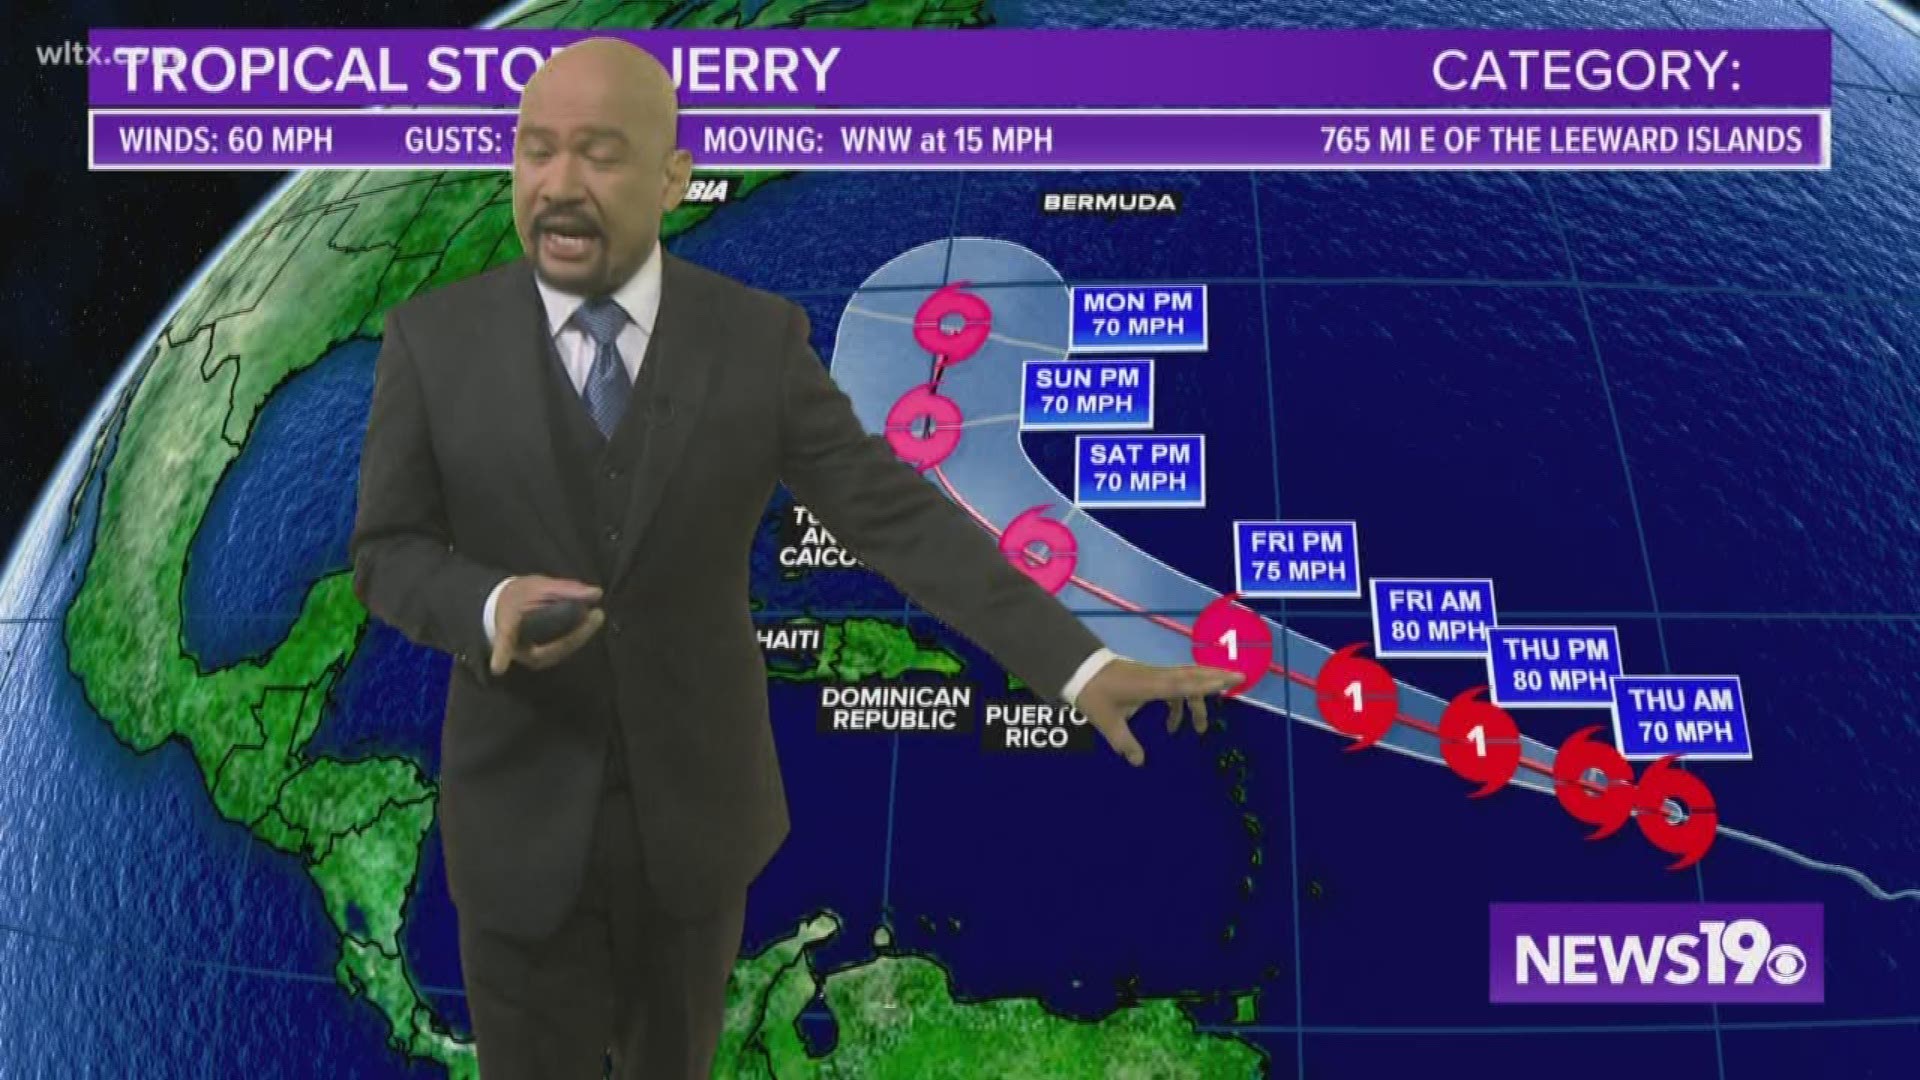 Tropical storm Jerry became the 10th named storm of the 2019 season.